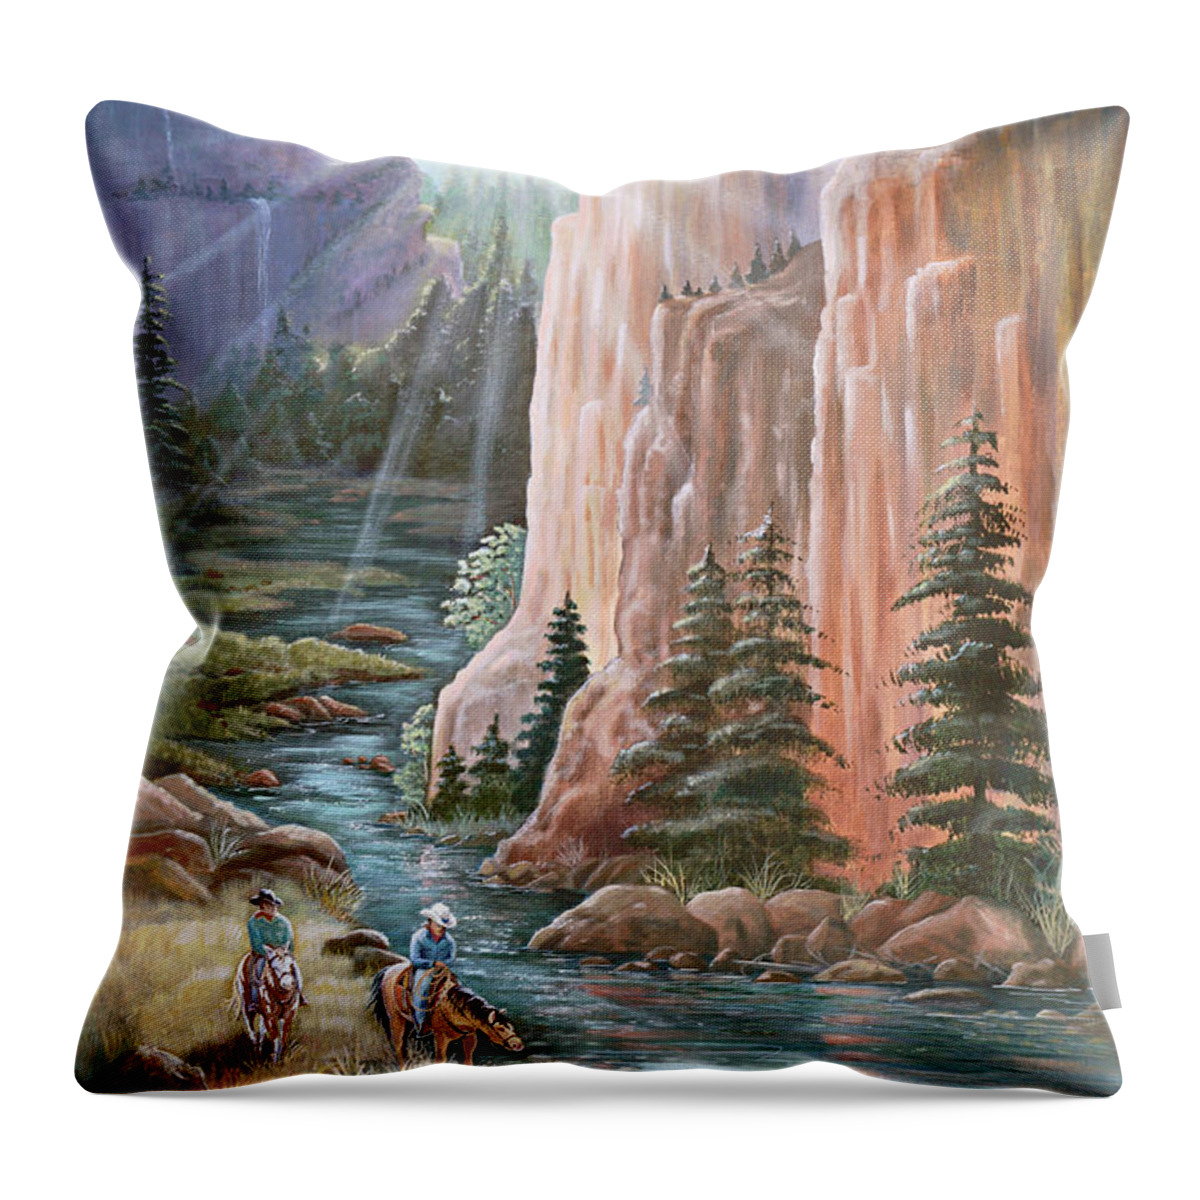 Sunrise Throw Pillow featuring the painting Rim Canyon Ride by Marilyn Smith